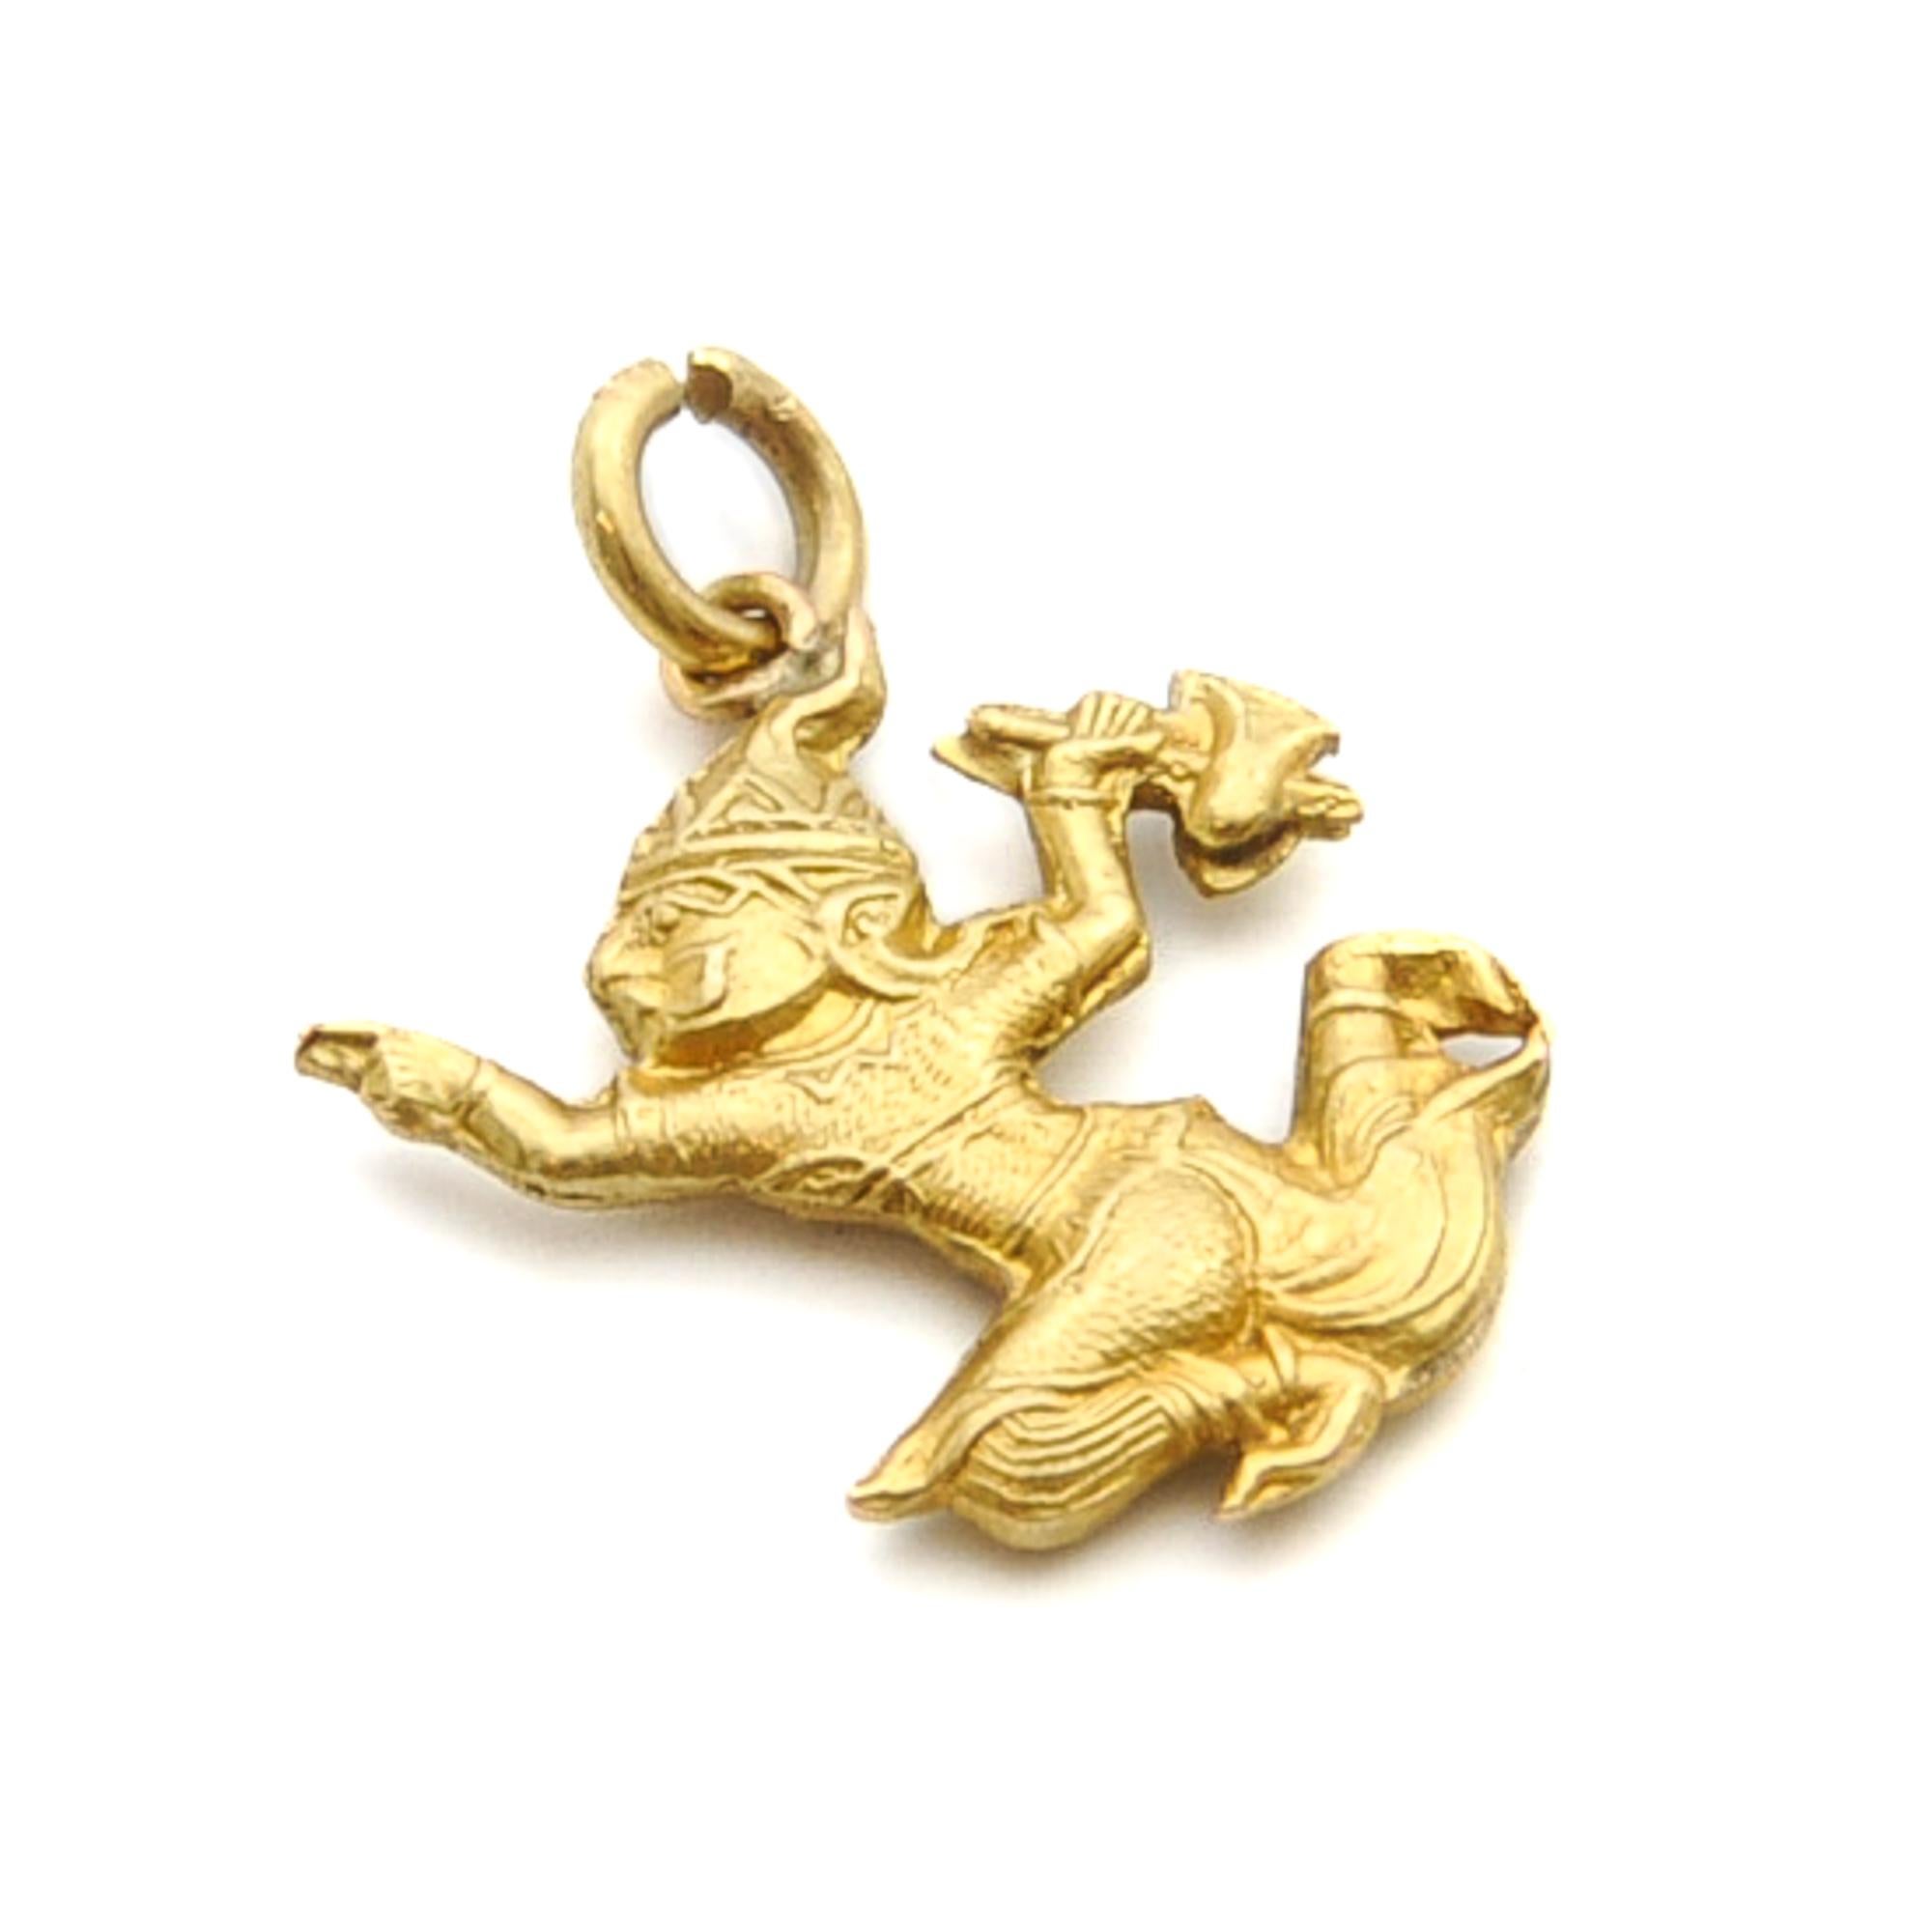 Vintage Indonesian 18 Karat Gold Charm Pendant In Good Condition For Sale In Rotterdam, NL